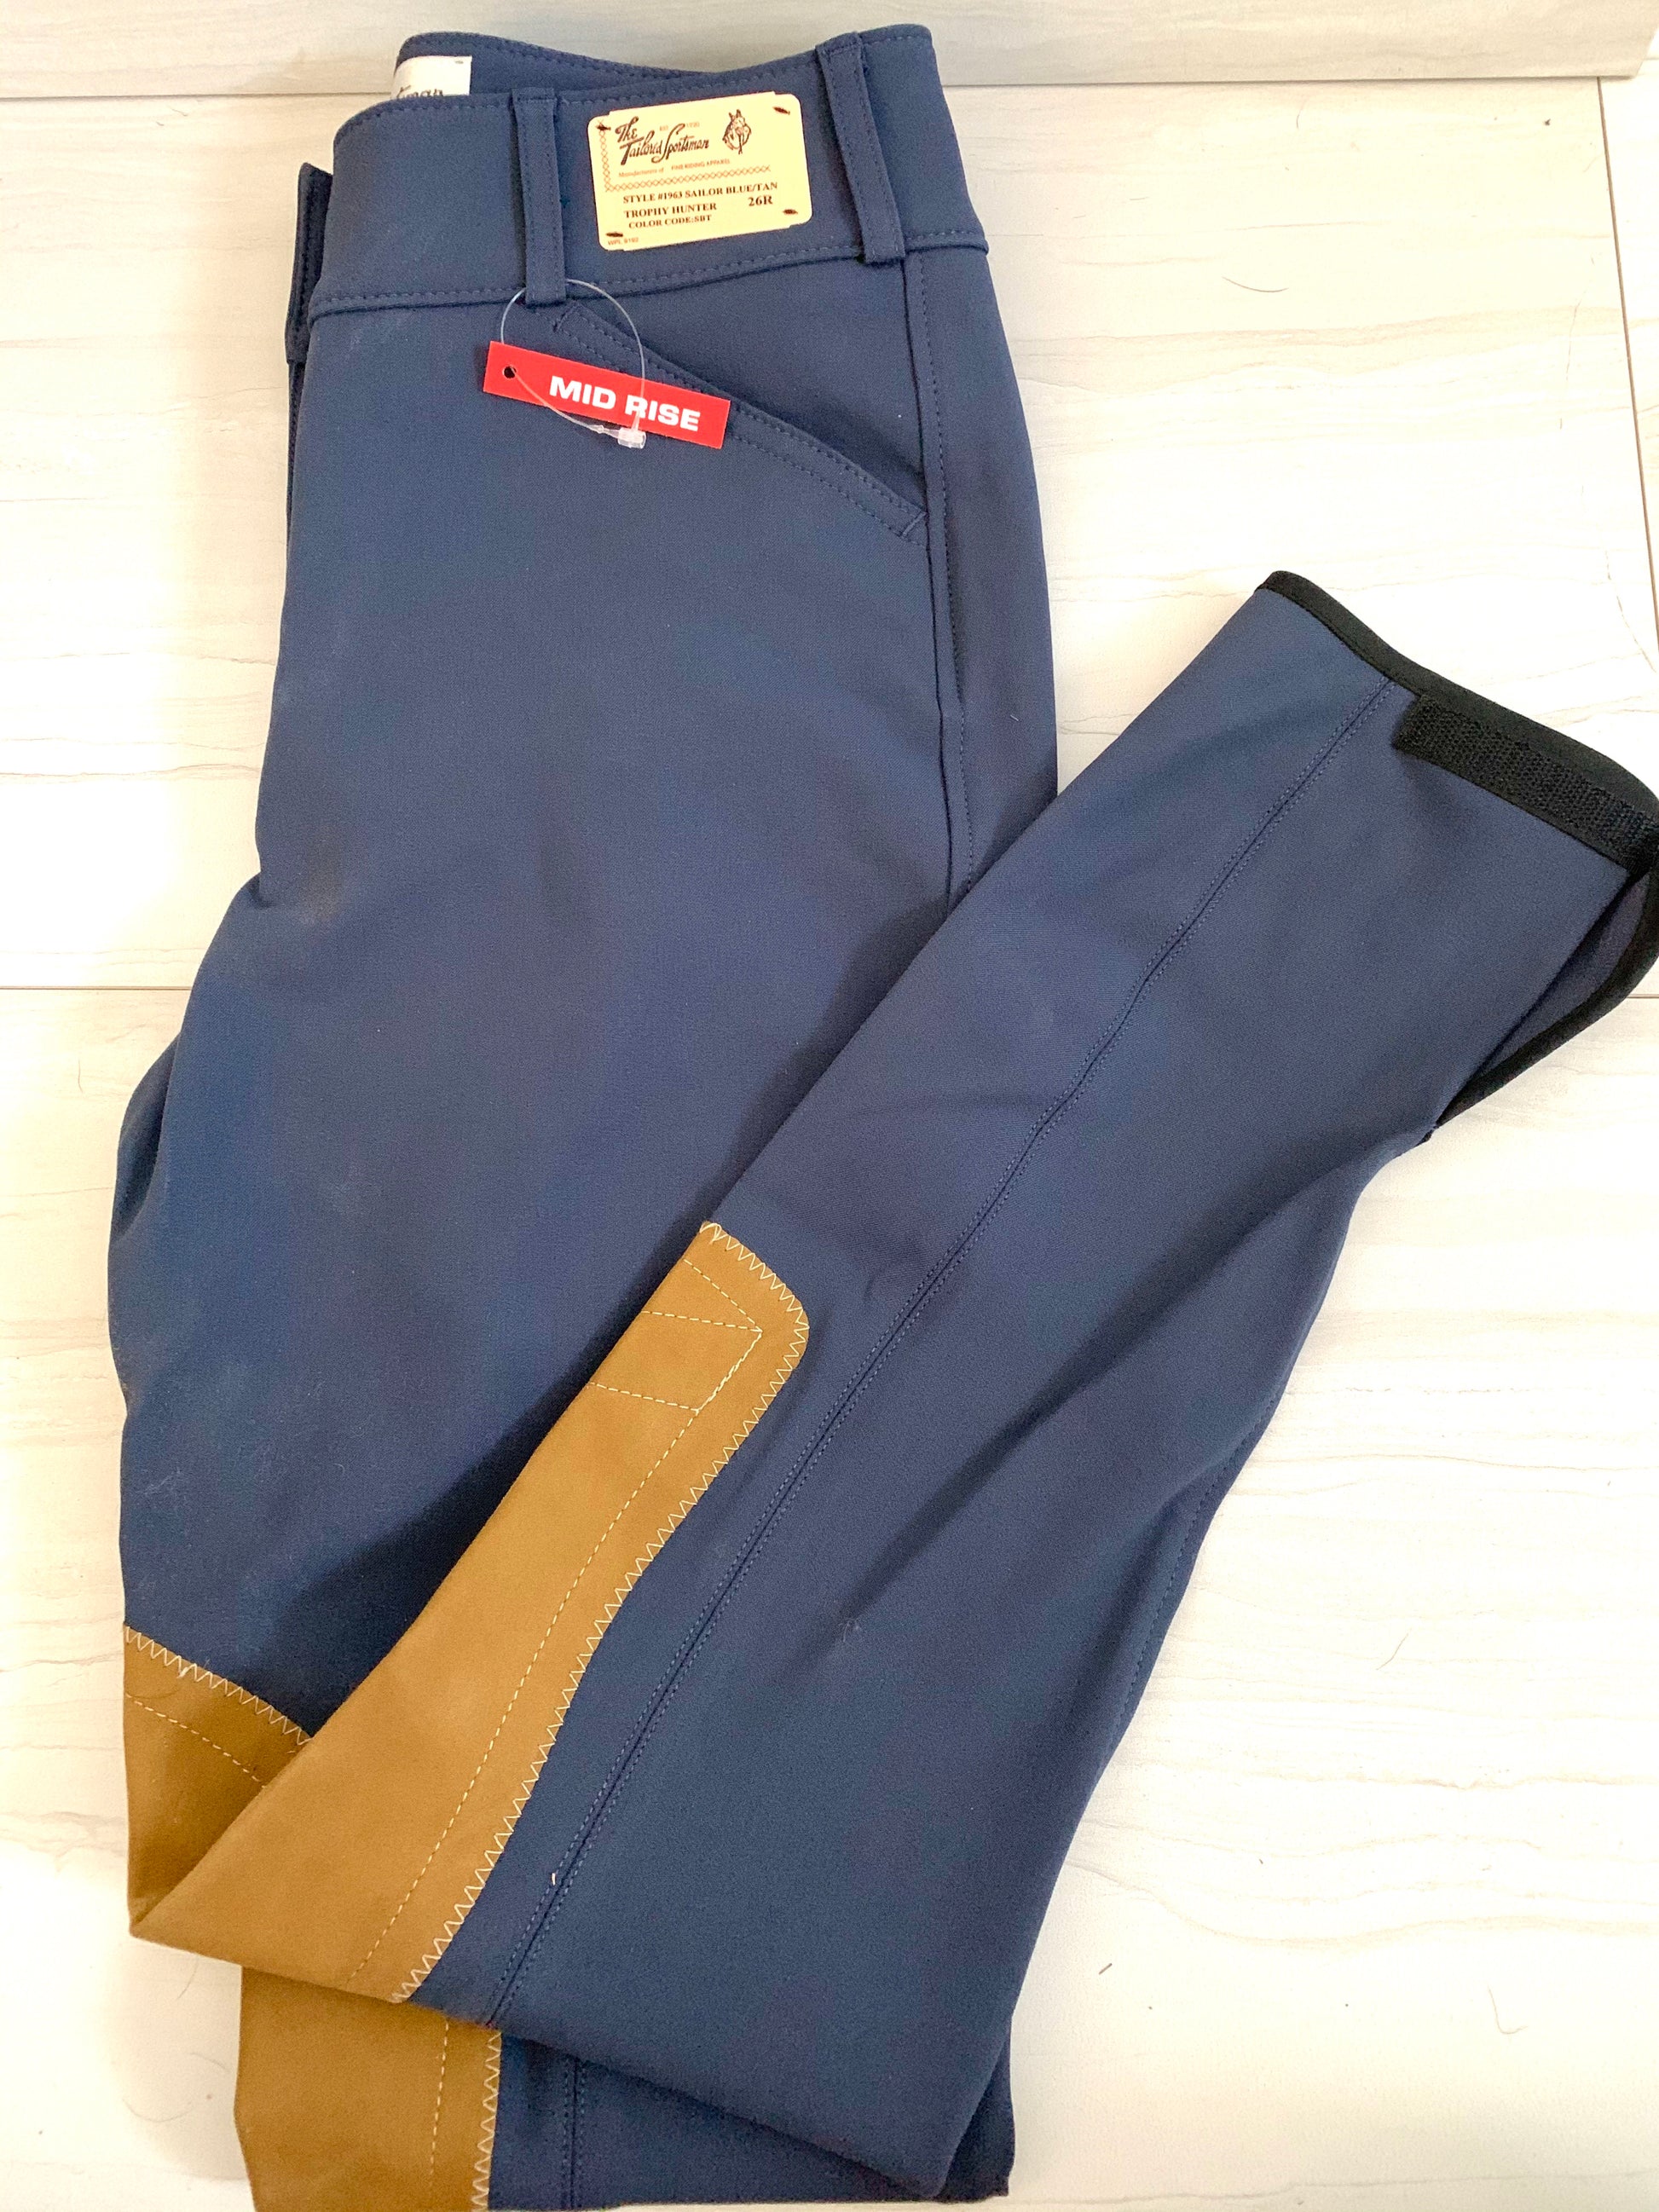 Tailored sportsman sailor blue mid rise breeches